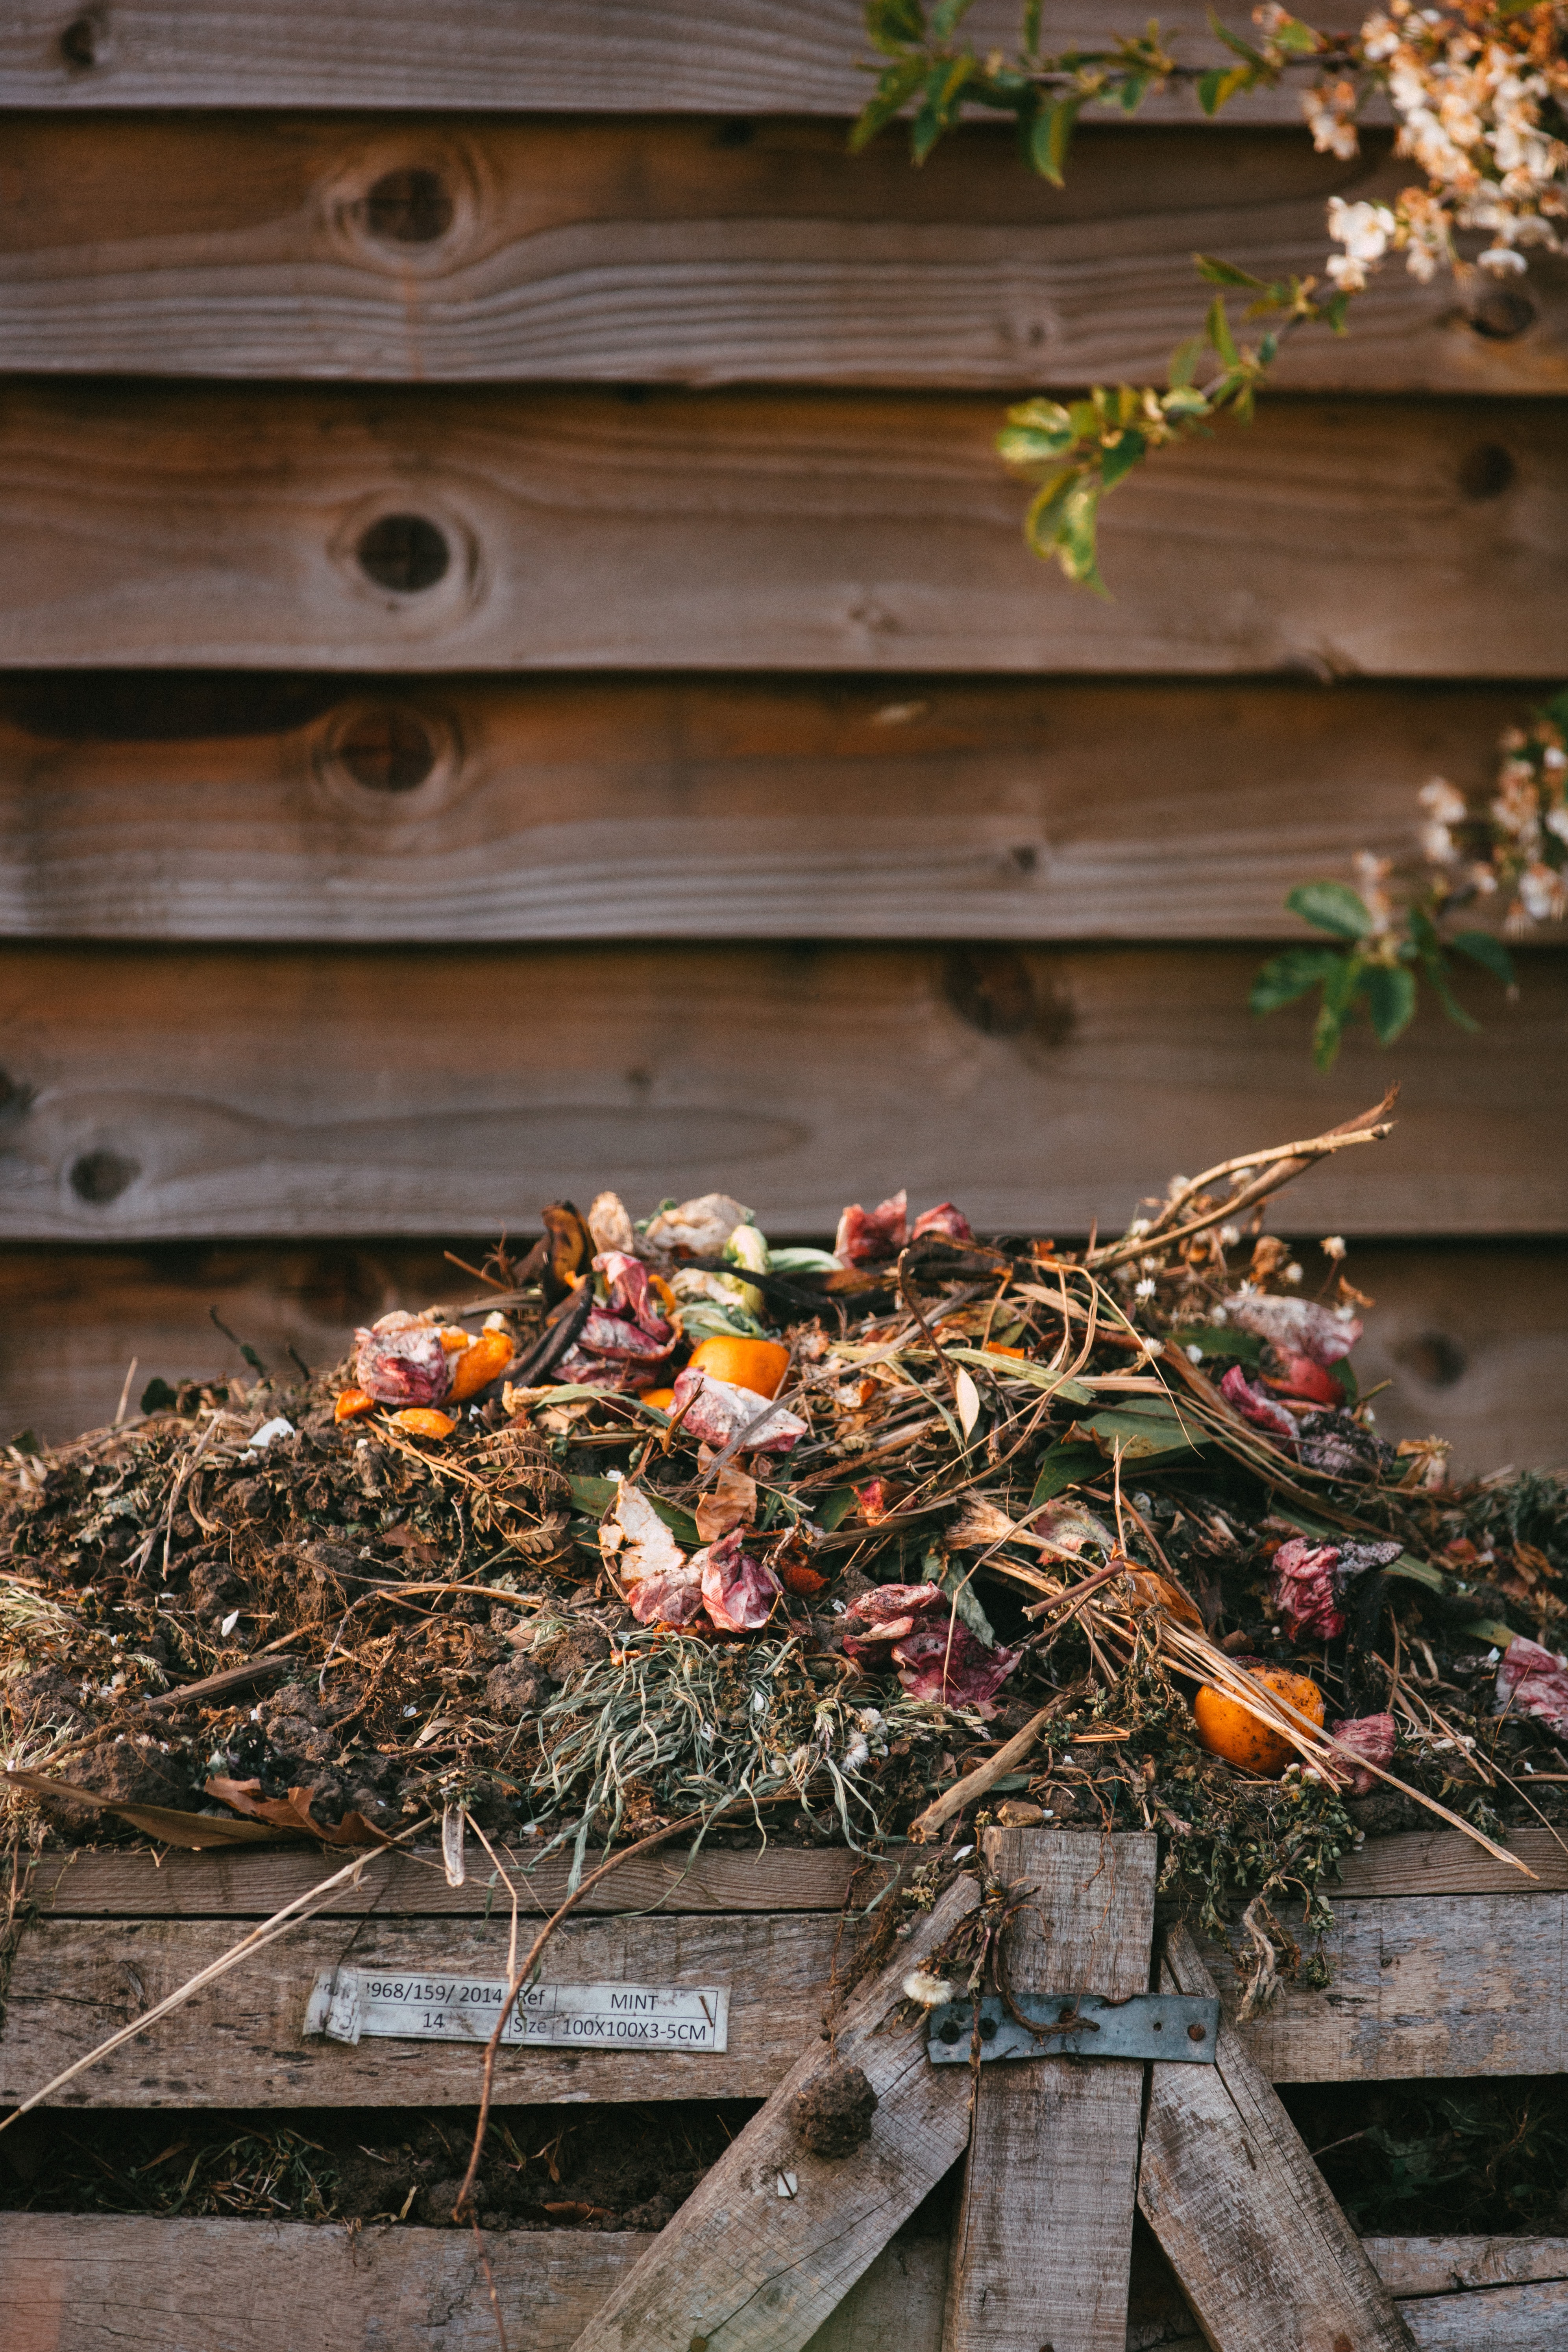 10 Surprising Things You Can Compost's featured image